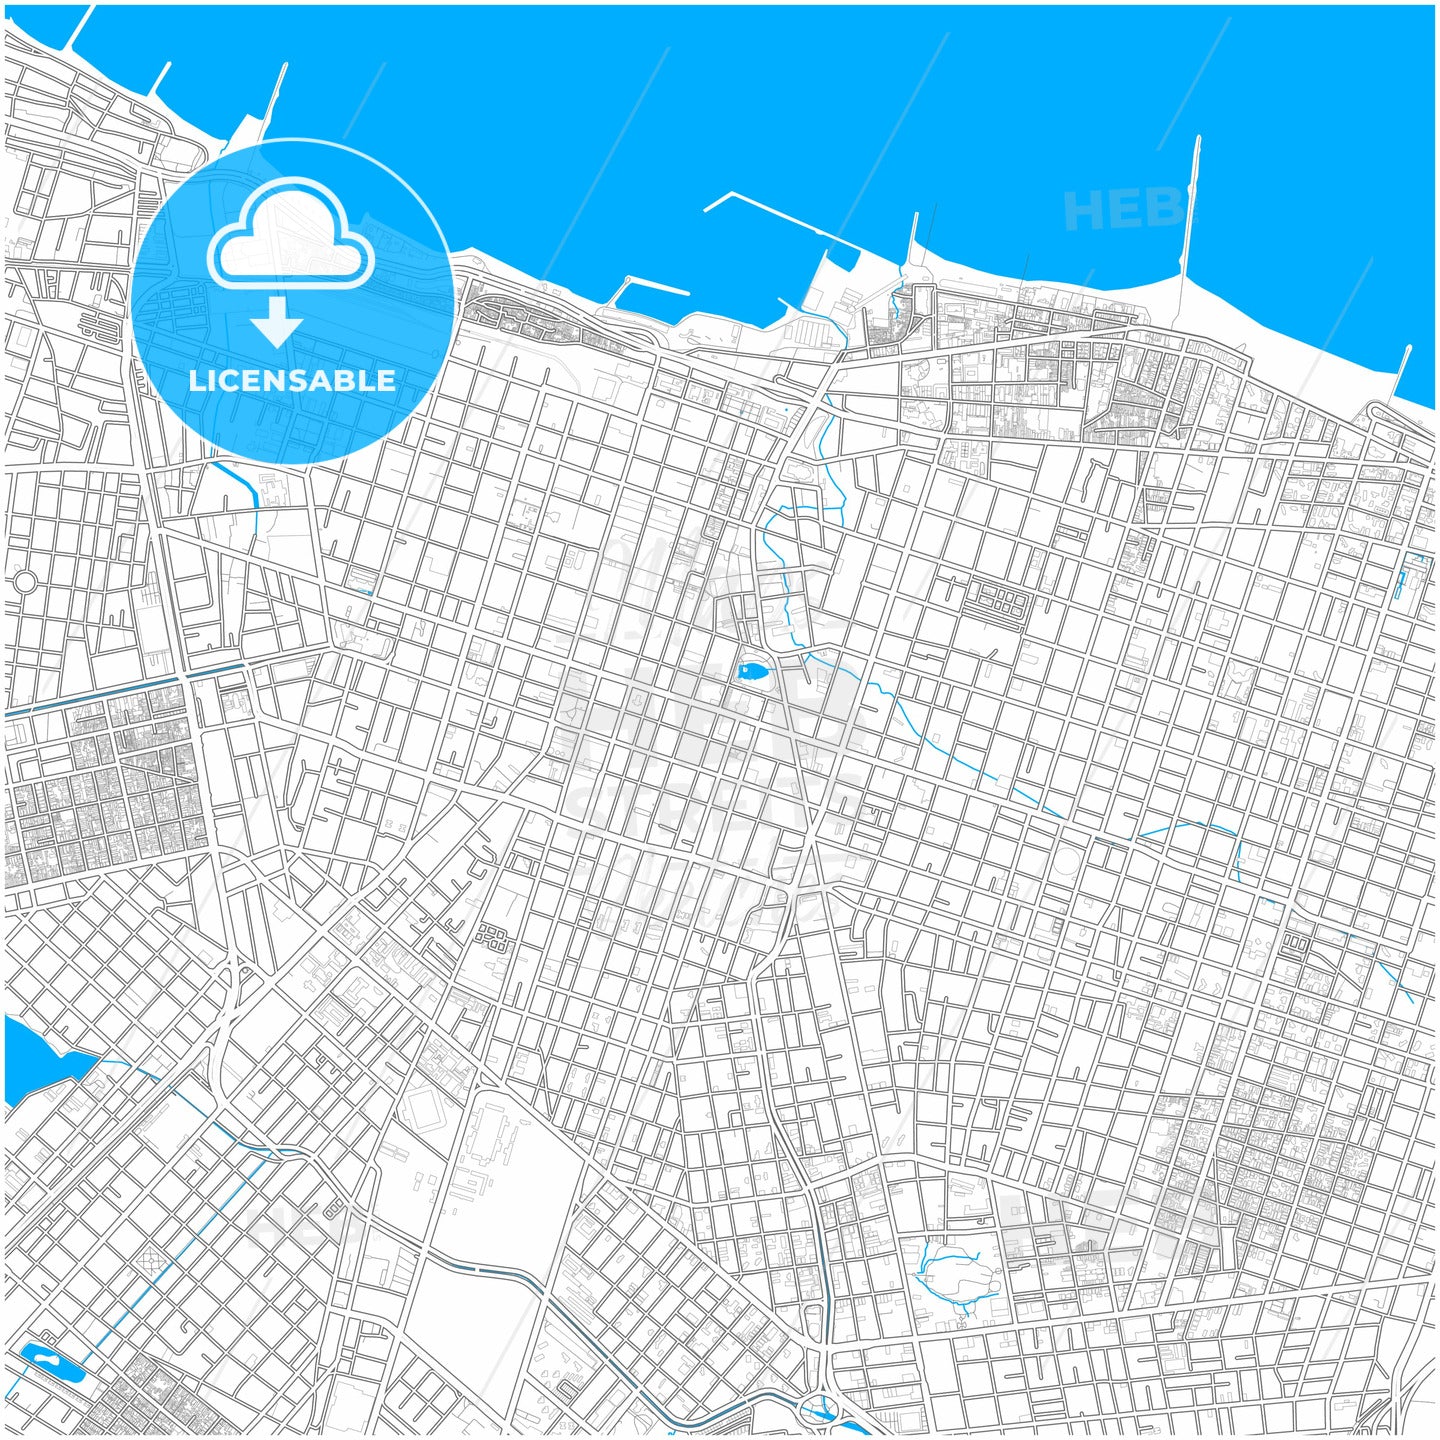 Fortaleza, Brazil, city map with high quality roads.